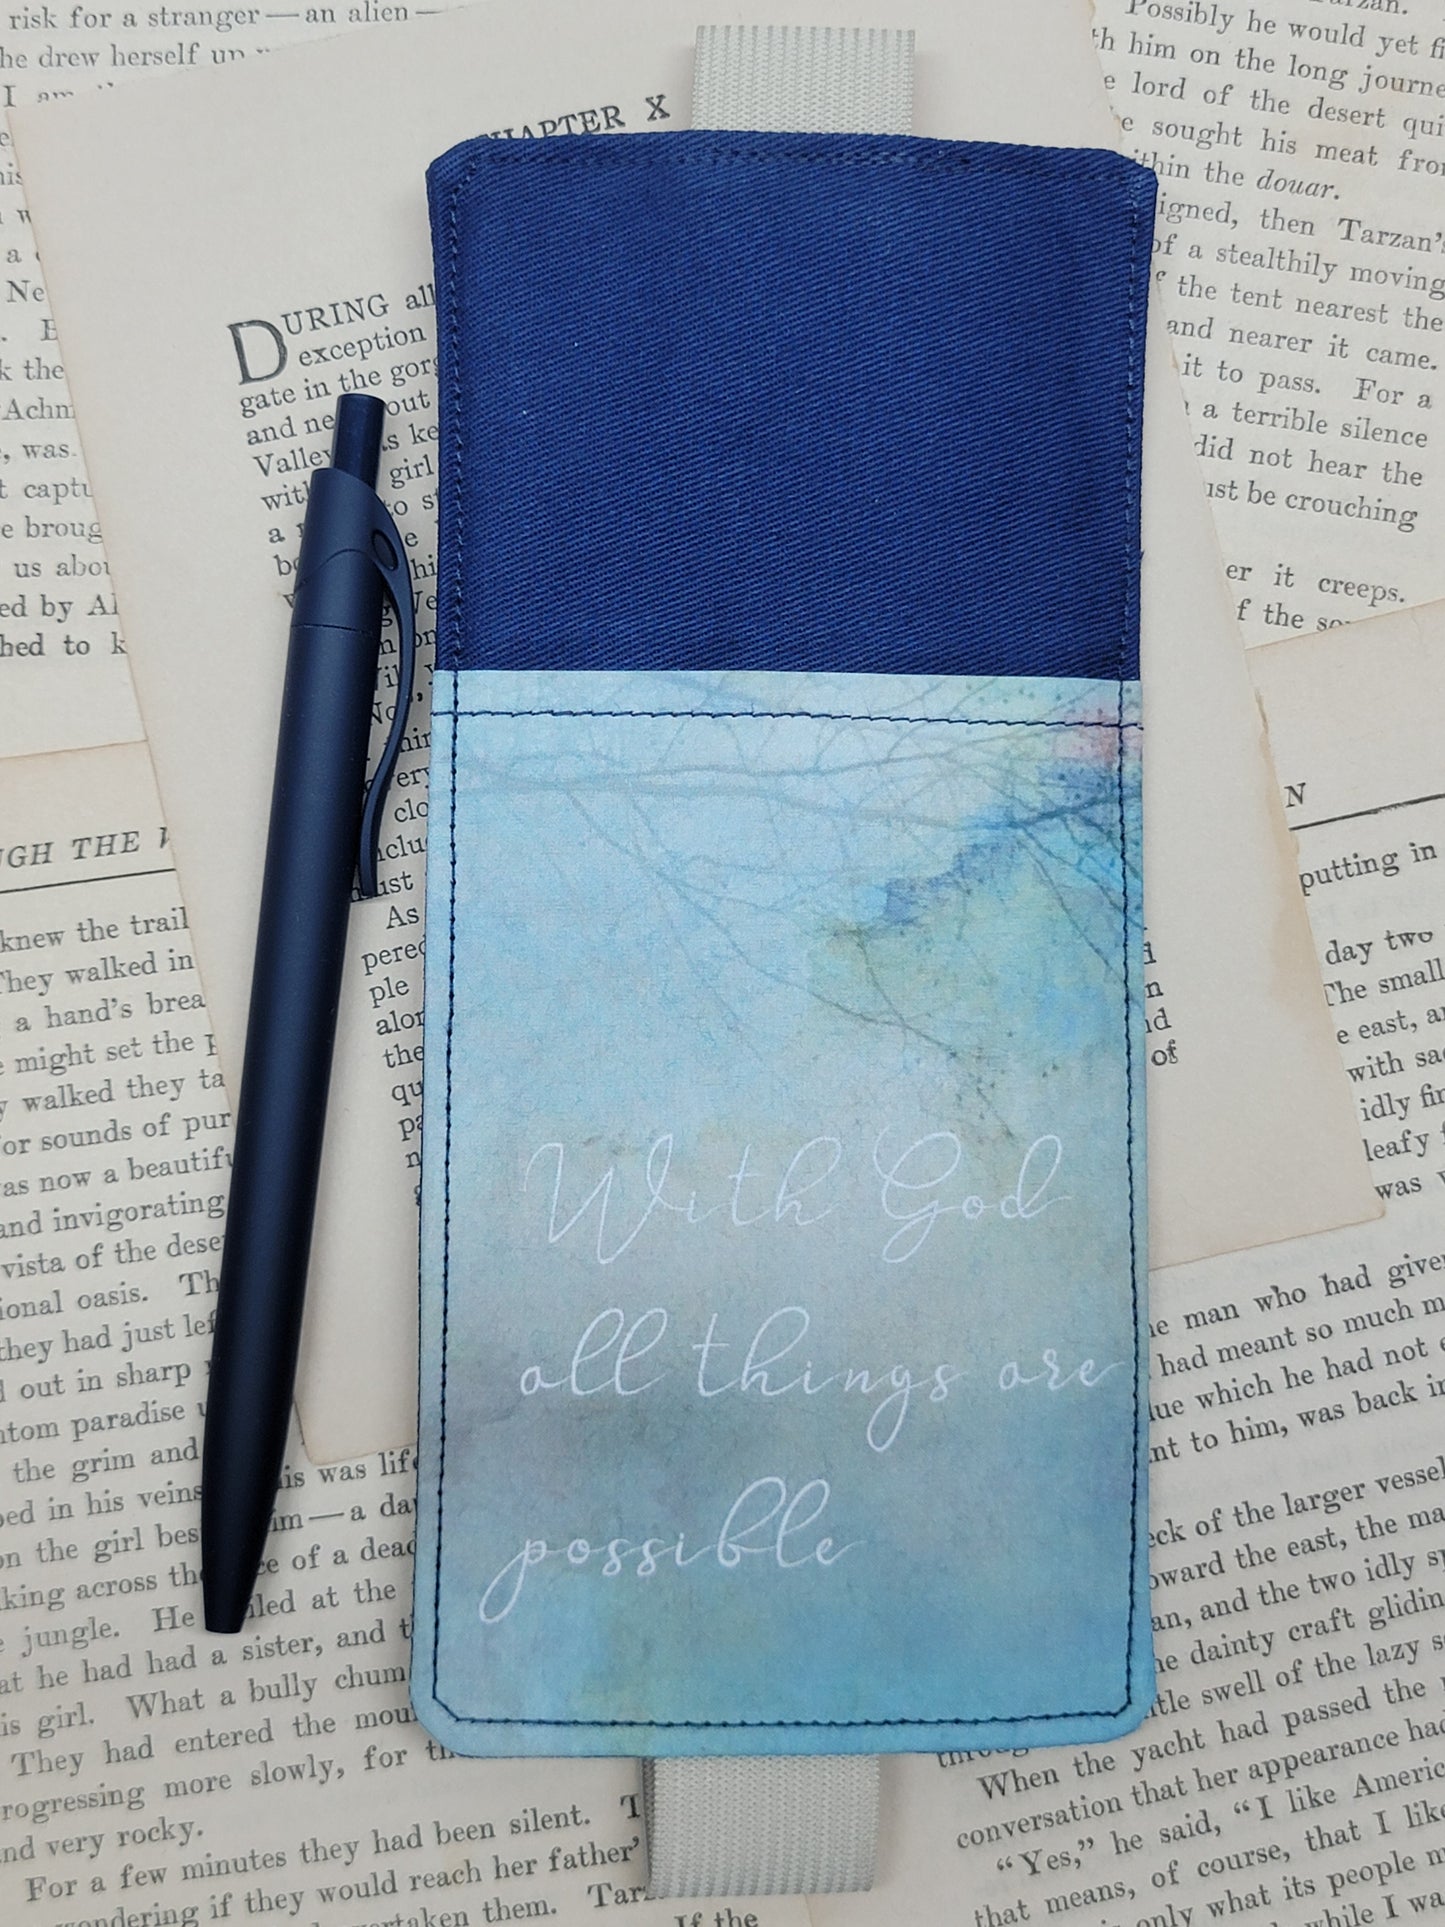 With God all things are possible - Pen Holder - 3